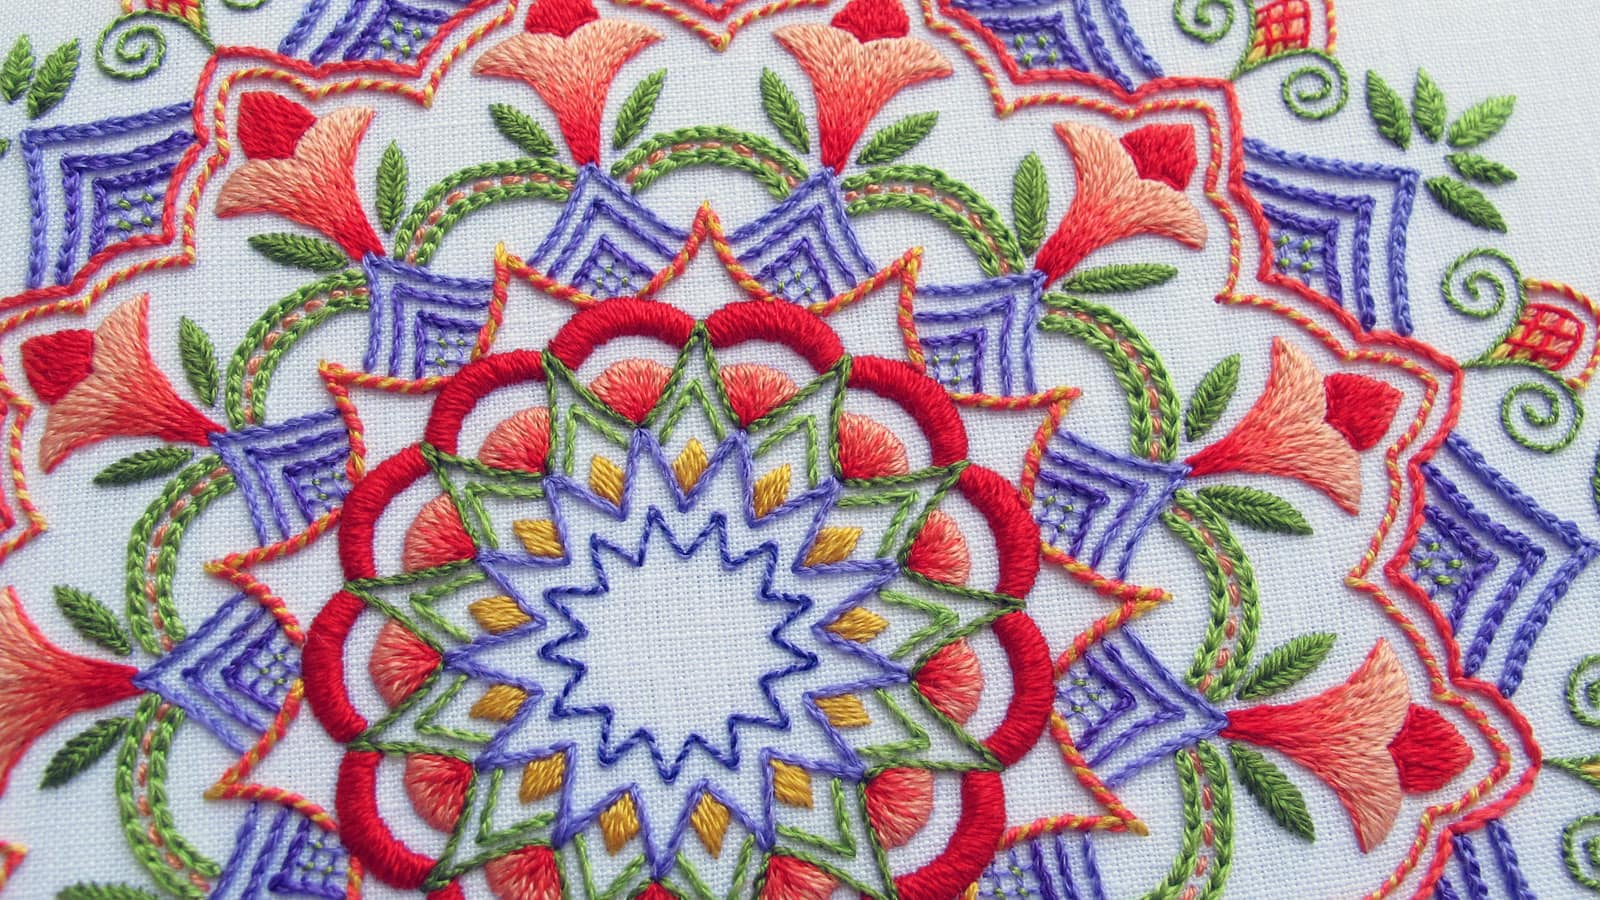 Silk Embroidery Patterns Free Needlenthread Tips Tricks And Great Resources For Hand Embroidery